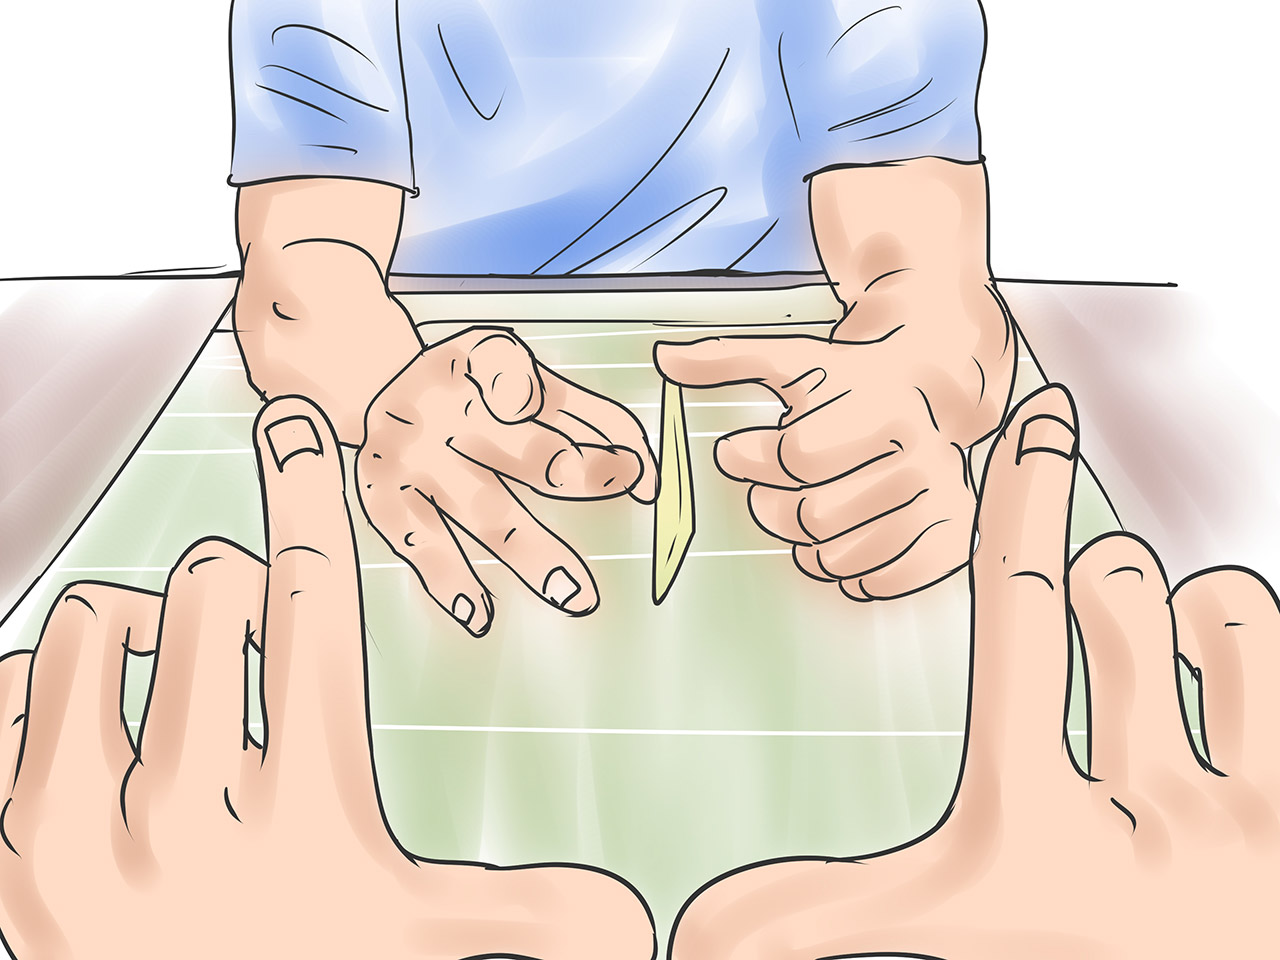 [Image: paper-flick-football-illustration-from-wikihow.jpg]